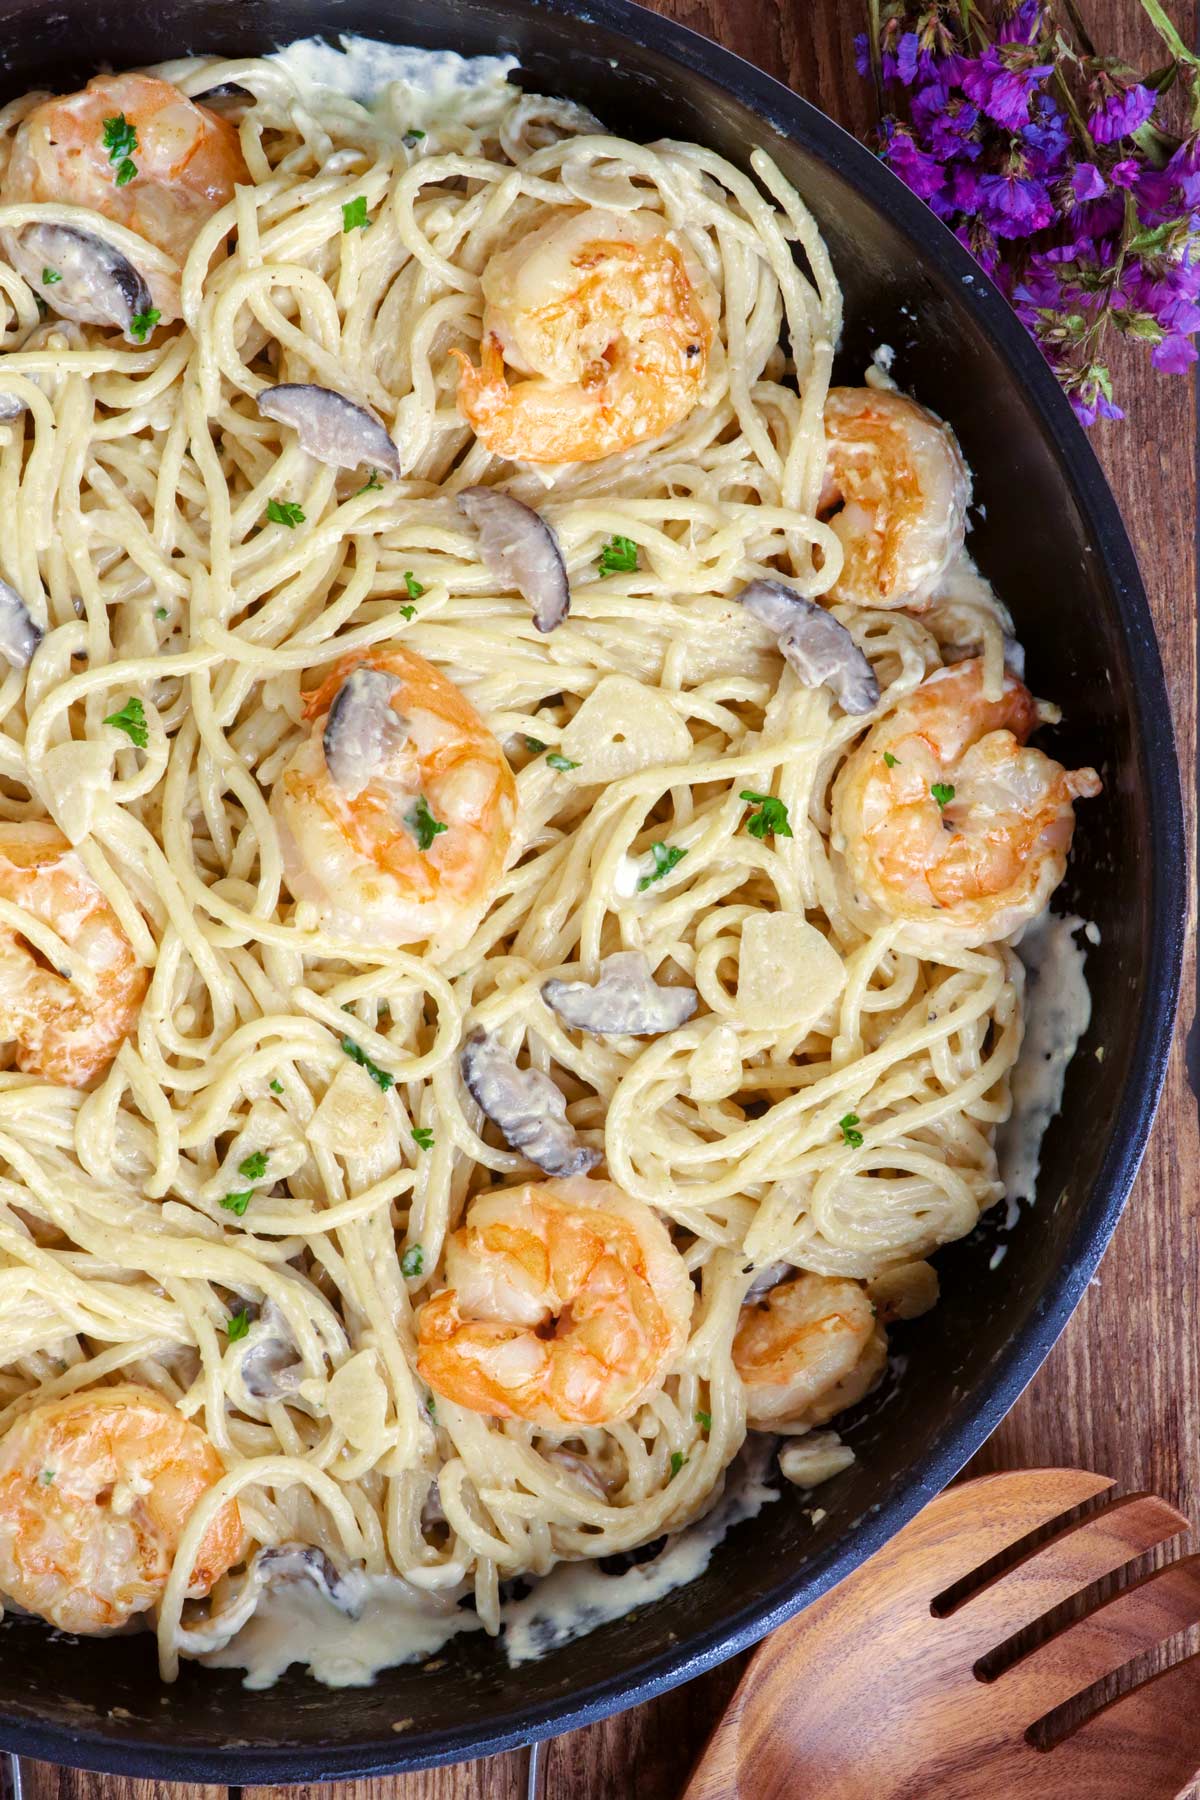 Freshly cooked creamy prawn pasta with plump prawns and meaty mushrooms.